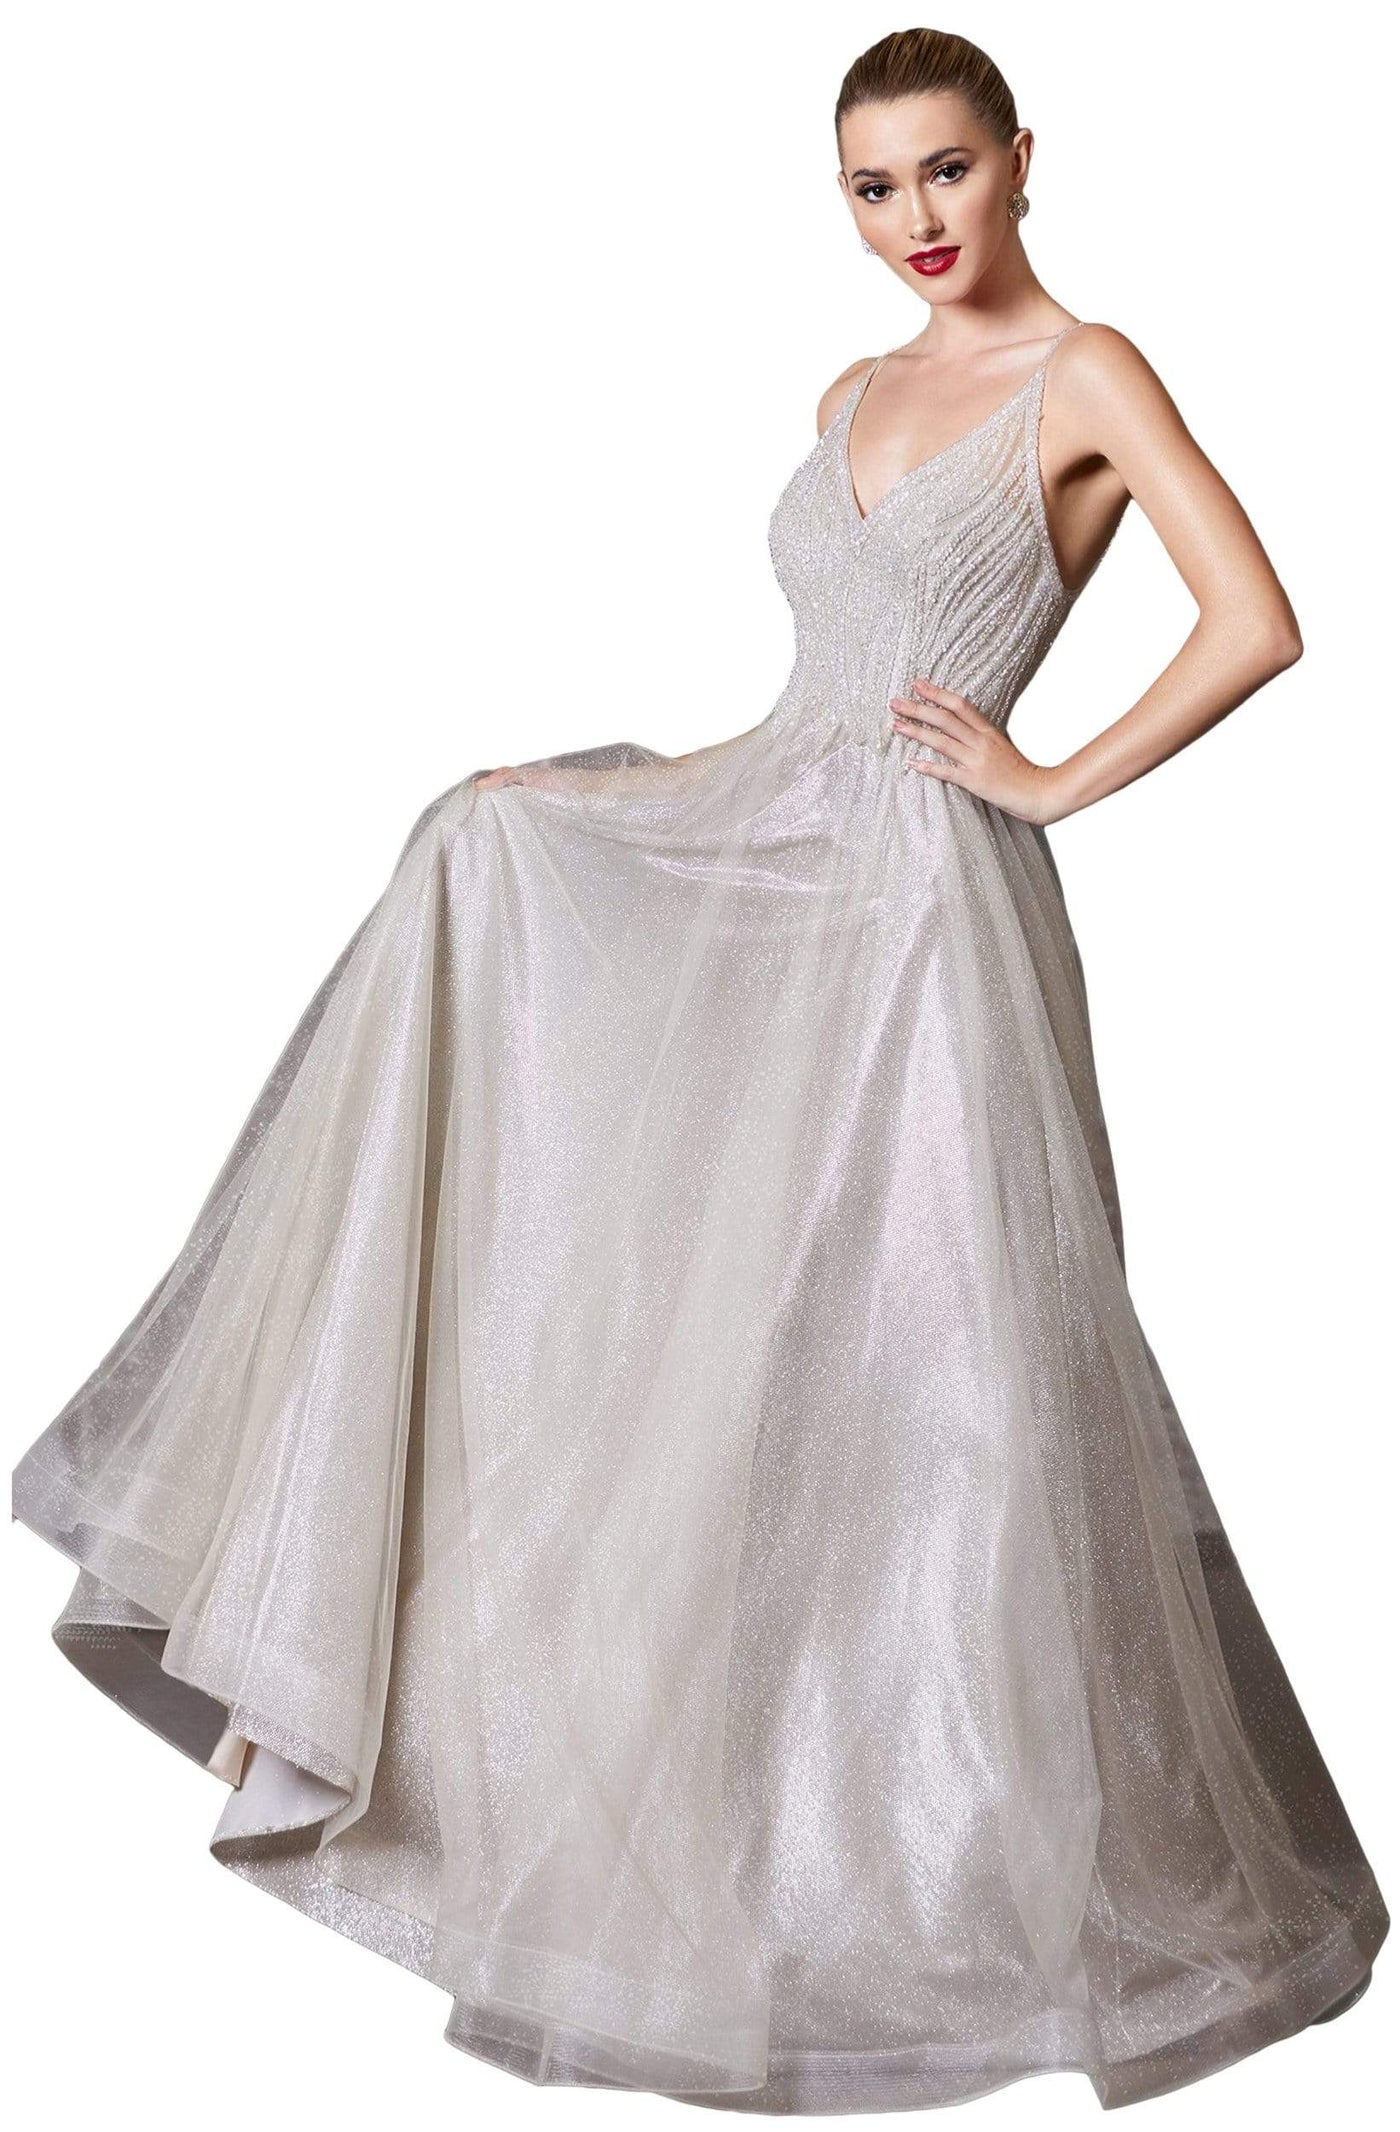 Cinderella Divine - CD910 Bead-Textured Bodice Glitter A-Line Gown Prom Dresses 2 / Light Champagne